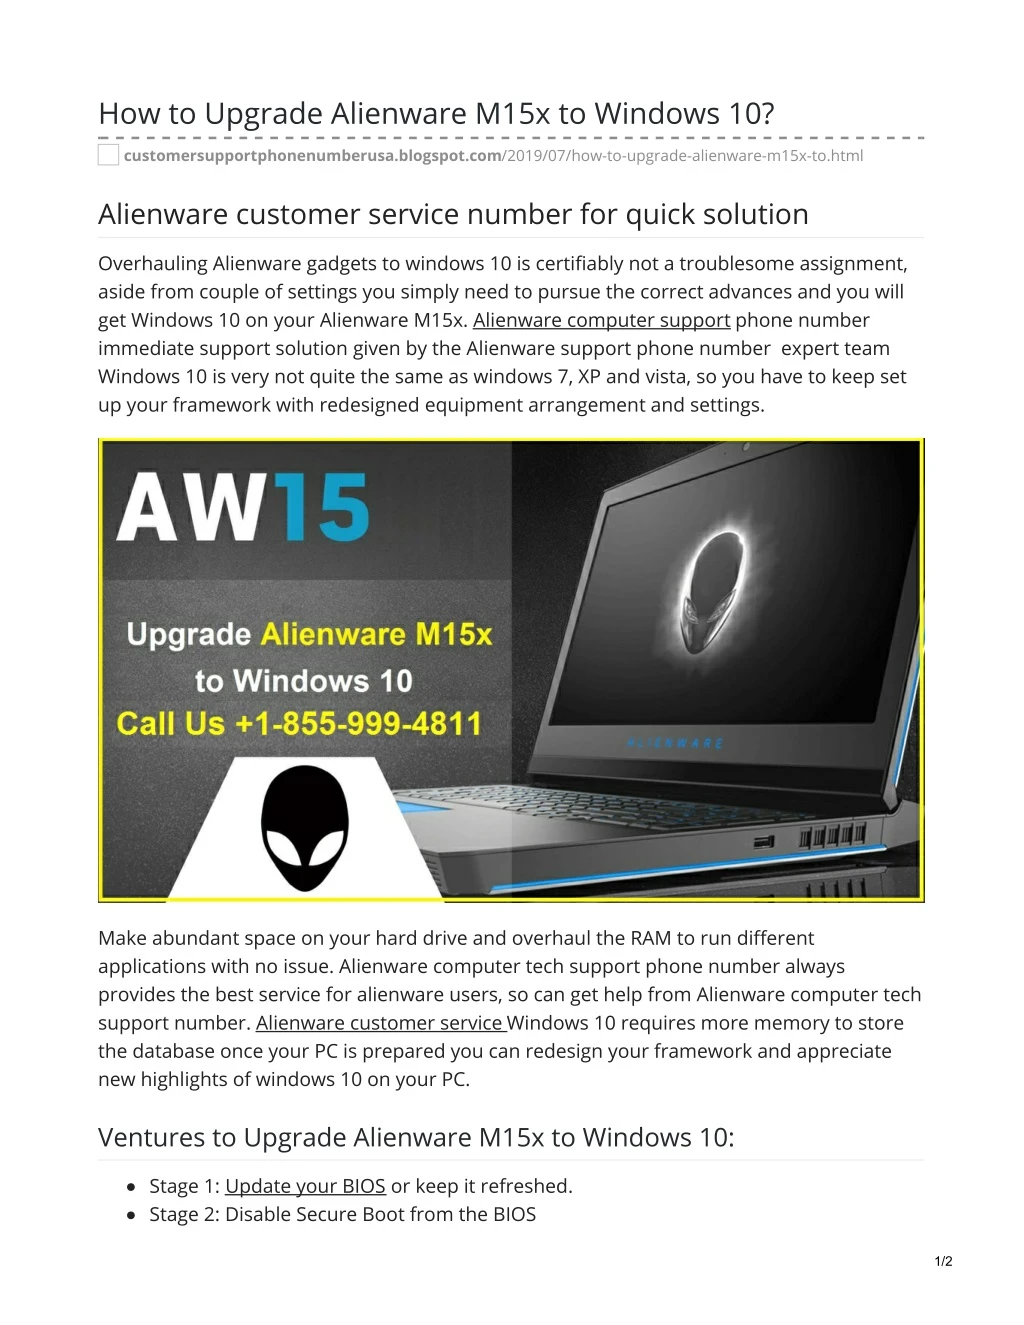 how to upgrade alienware m15x to windows 10